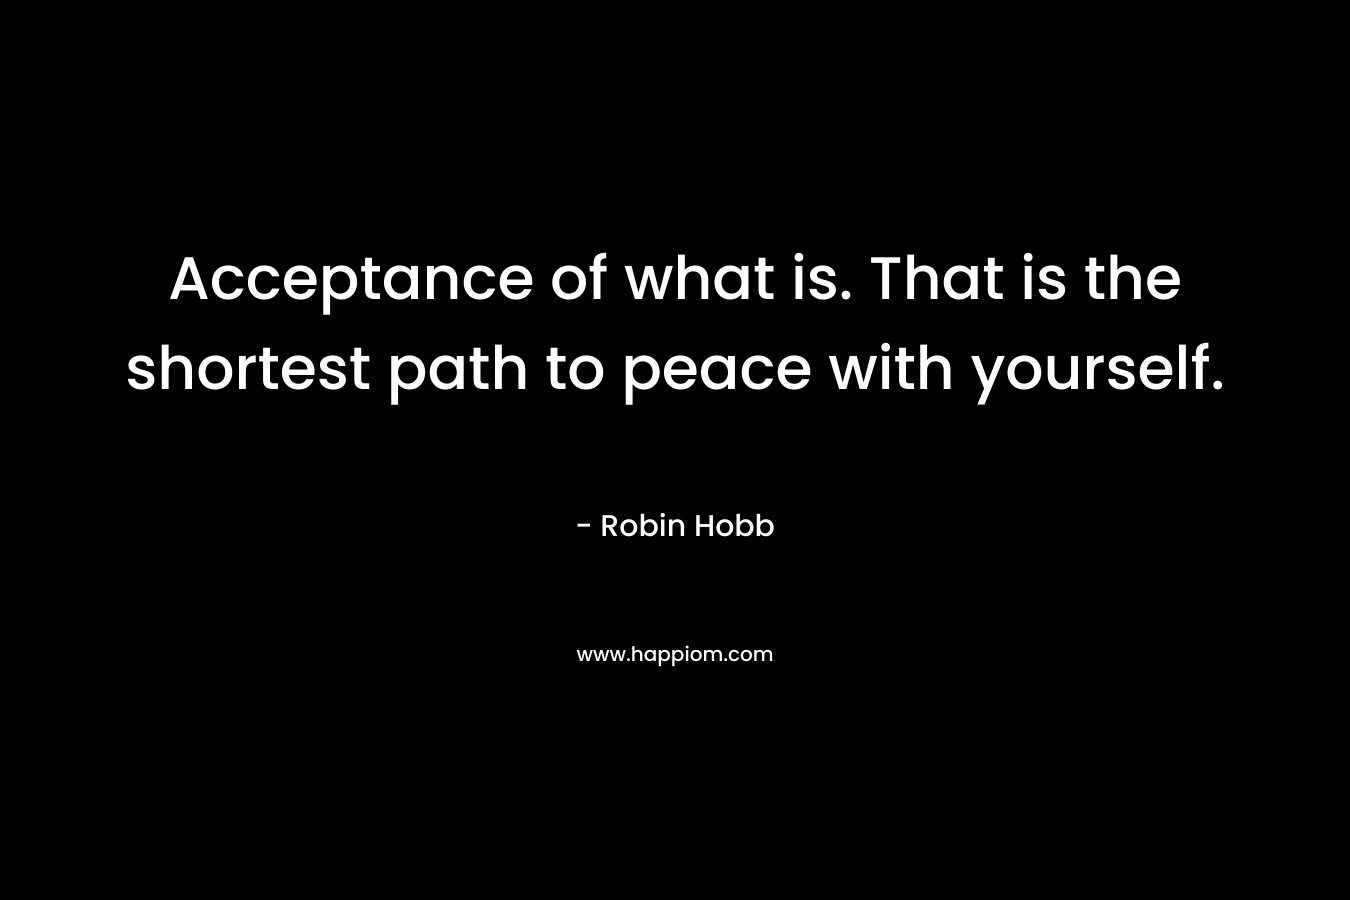 Acceptance of what is. That is the shortest path to peace with yourself. – Robin Hobb